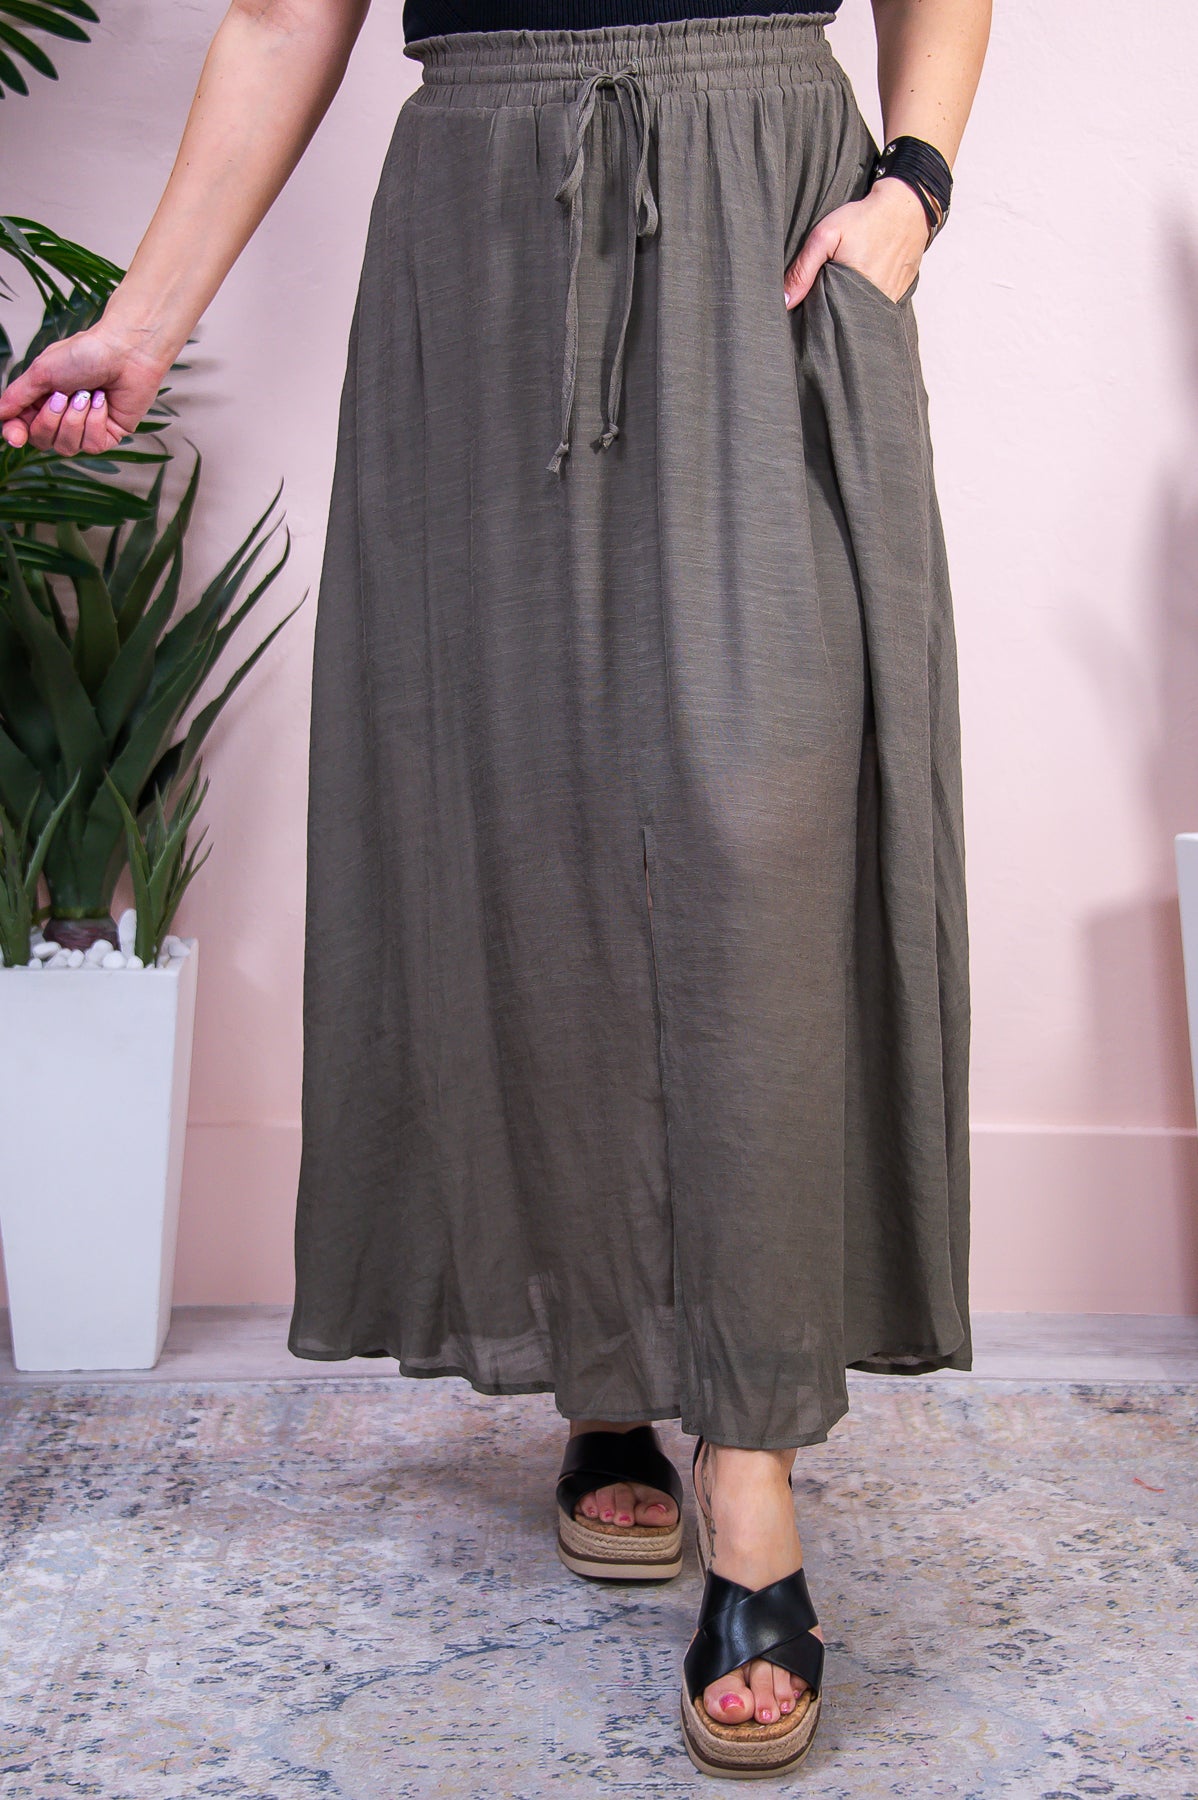 Salt In The Air Olive Solid Skirt - E1136OL